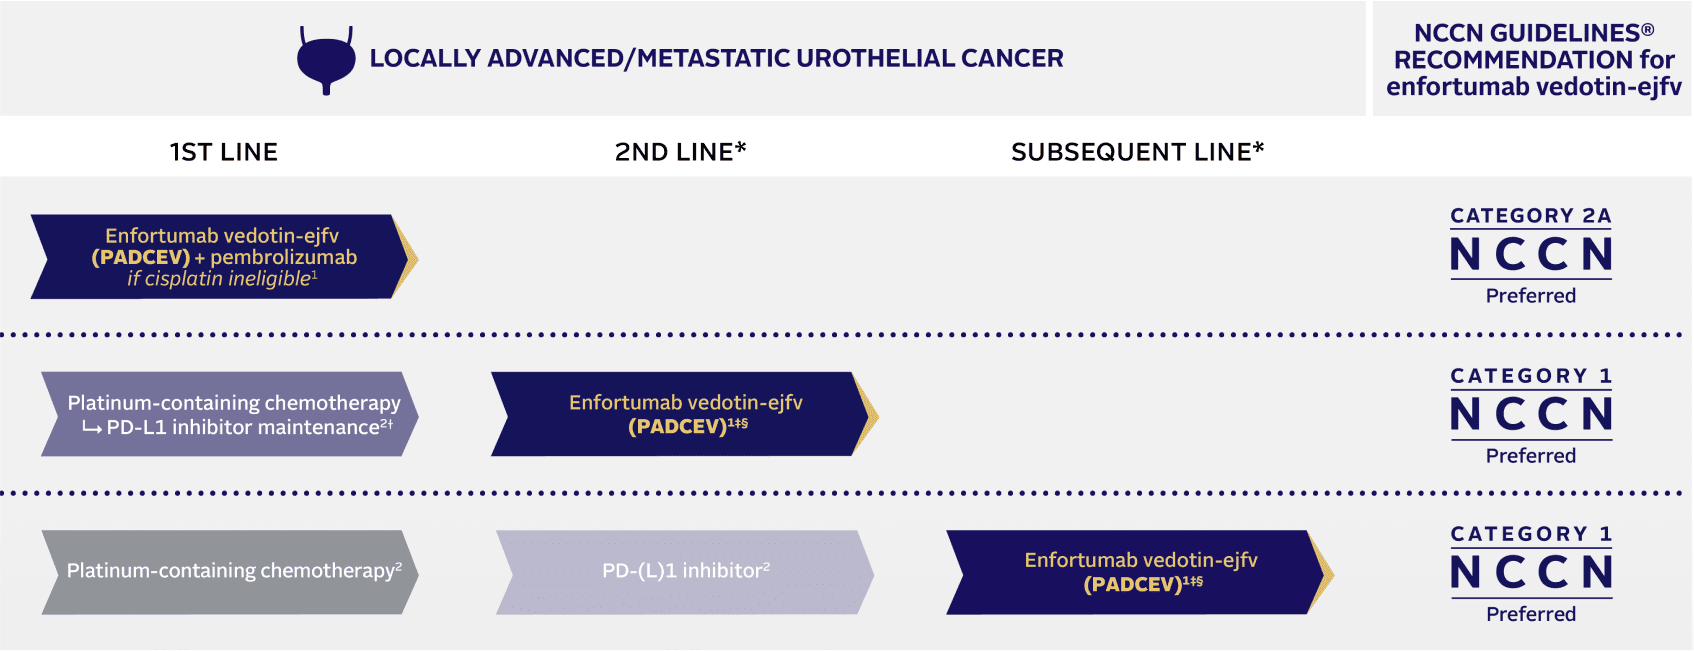 NCCN Guidelines® recommendation for enfortumab vedotin-ejfv.